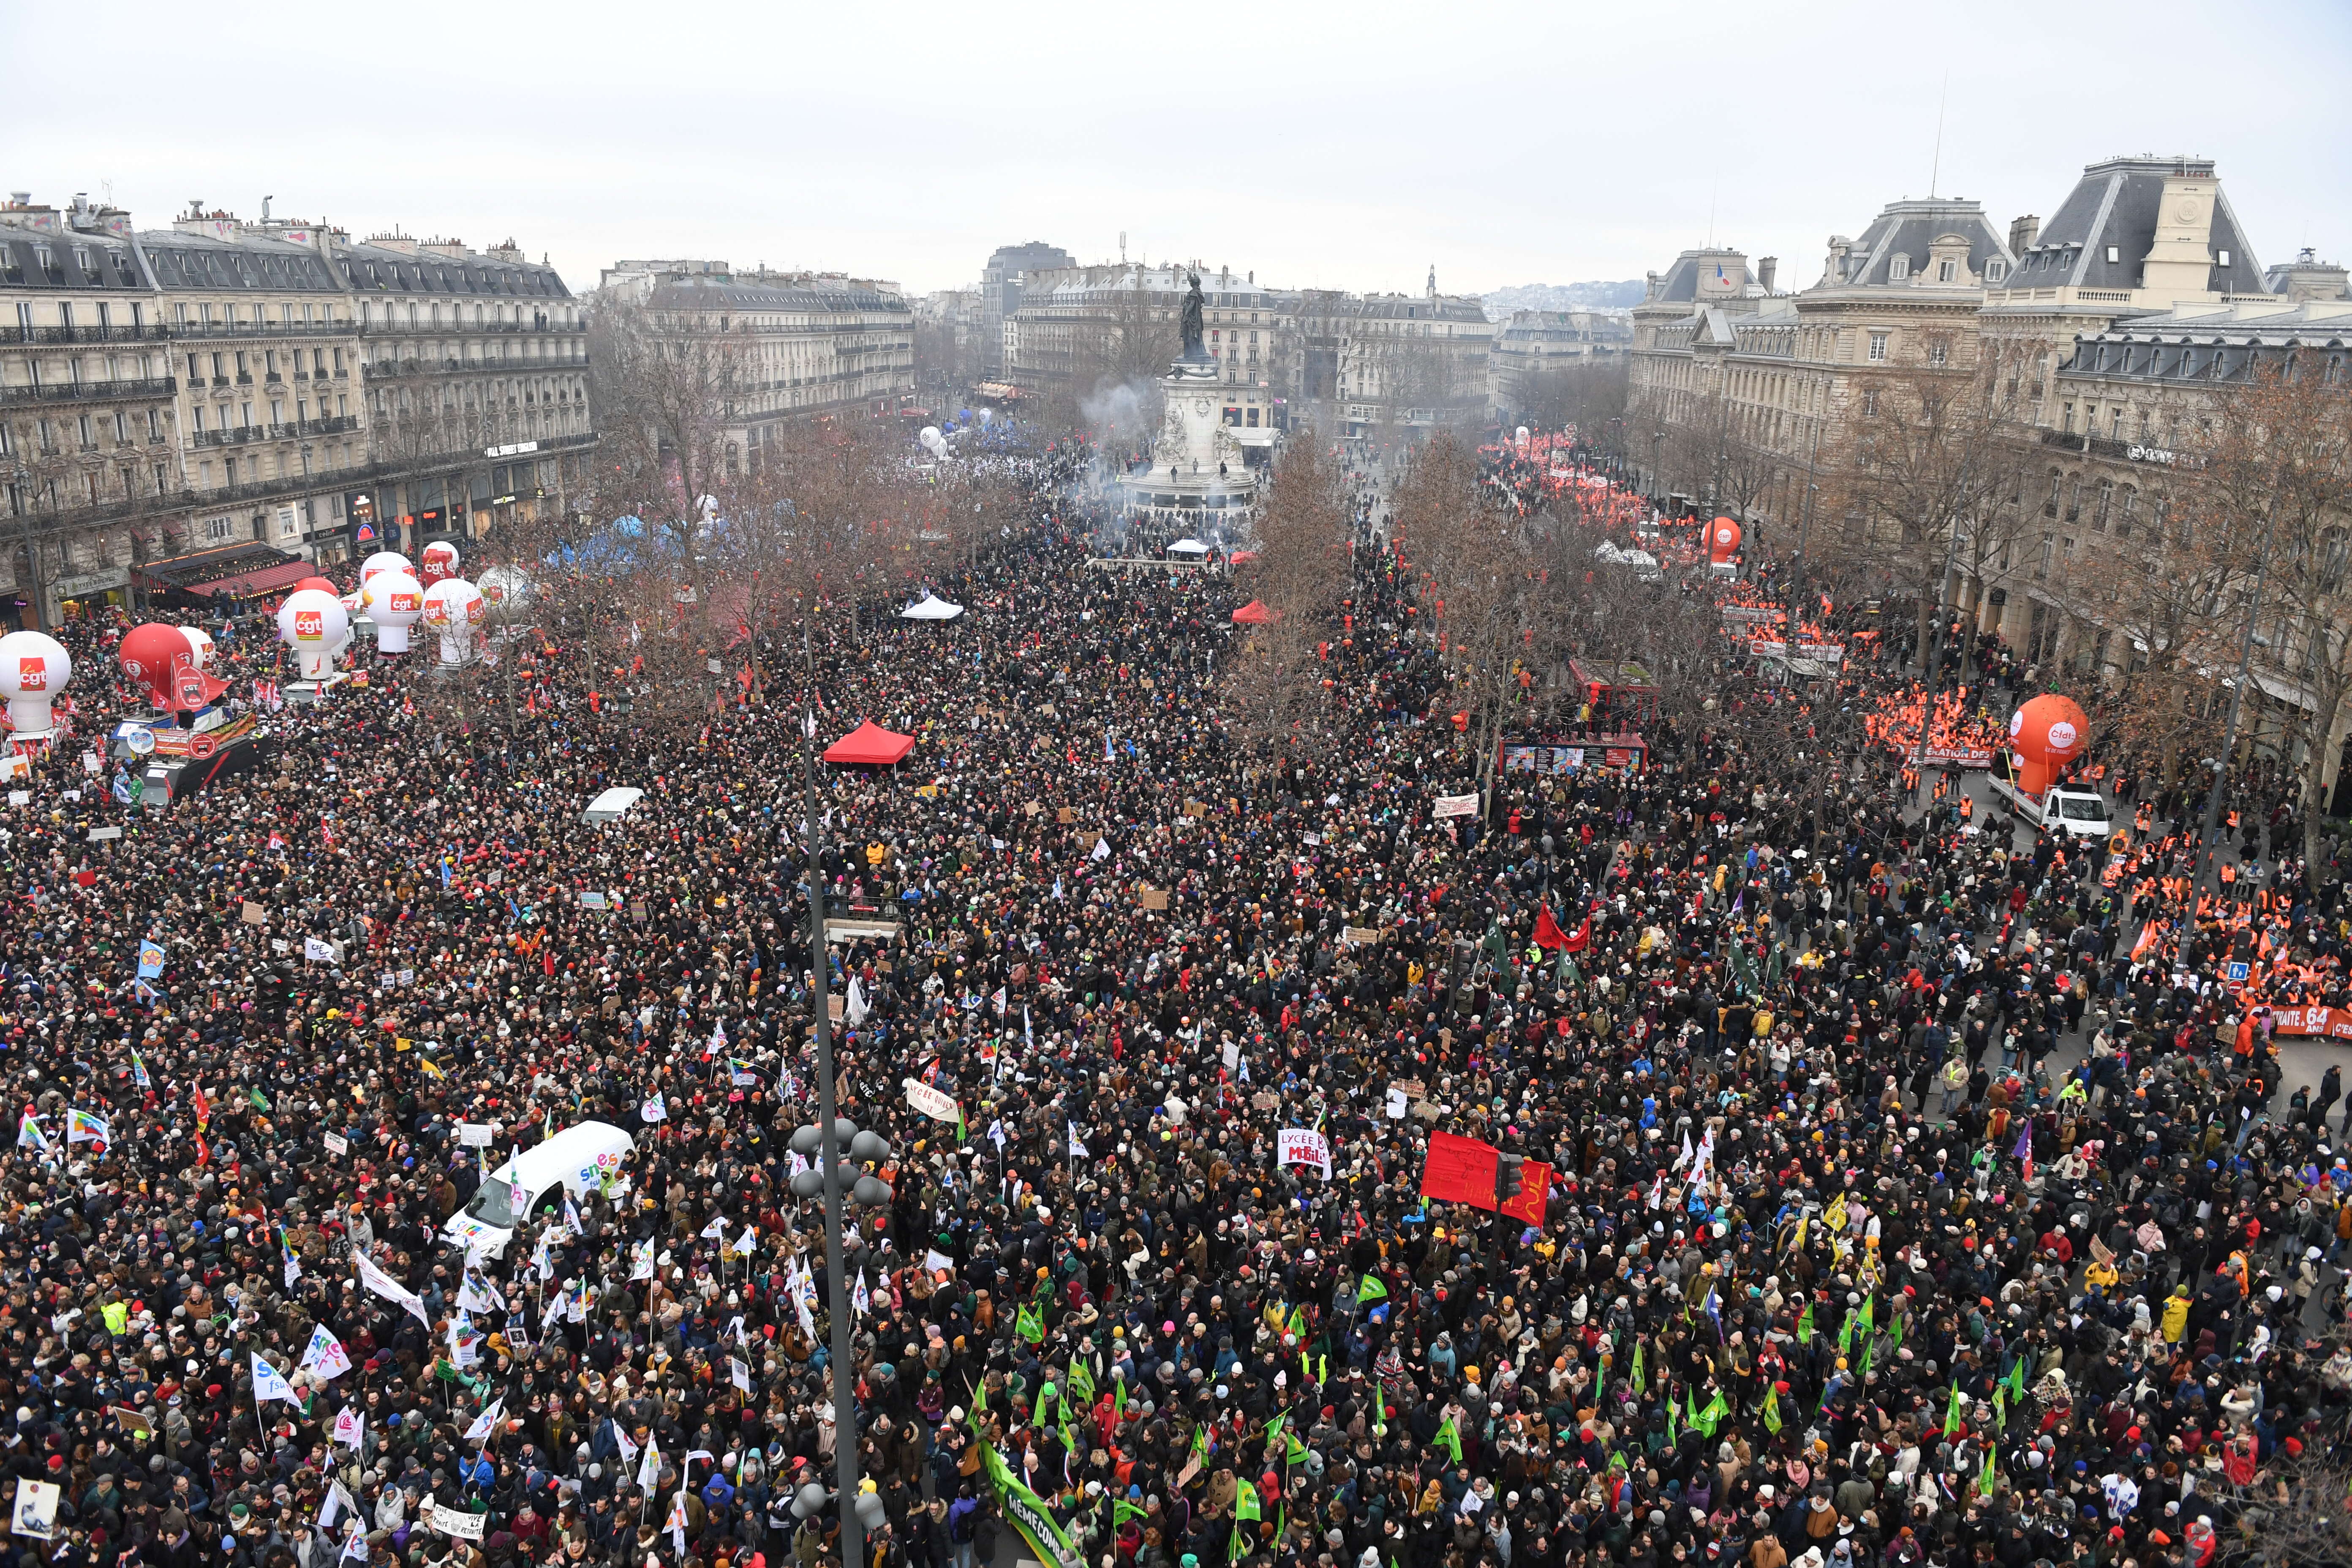 Demonstrators gather in Place de la Republique during a rally in Paris on January 19, 2023, as workers go on strike over the French President's plan to raise the legal retirement age from 62 to 64. - A day of strikes and protests kicked off in France on January 19, set to disrupt transport and schooling across the country in a trial for the government as workers oppose a deeply unpopular pensions overhaul. (Photo by Alain JOCARD / AFP)